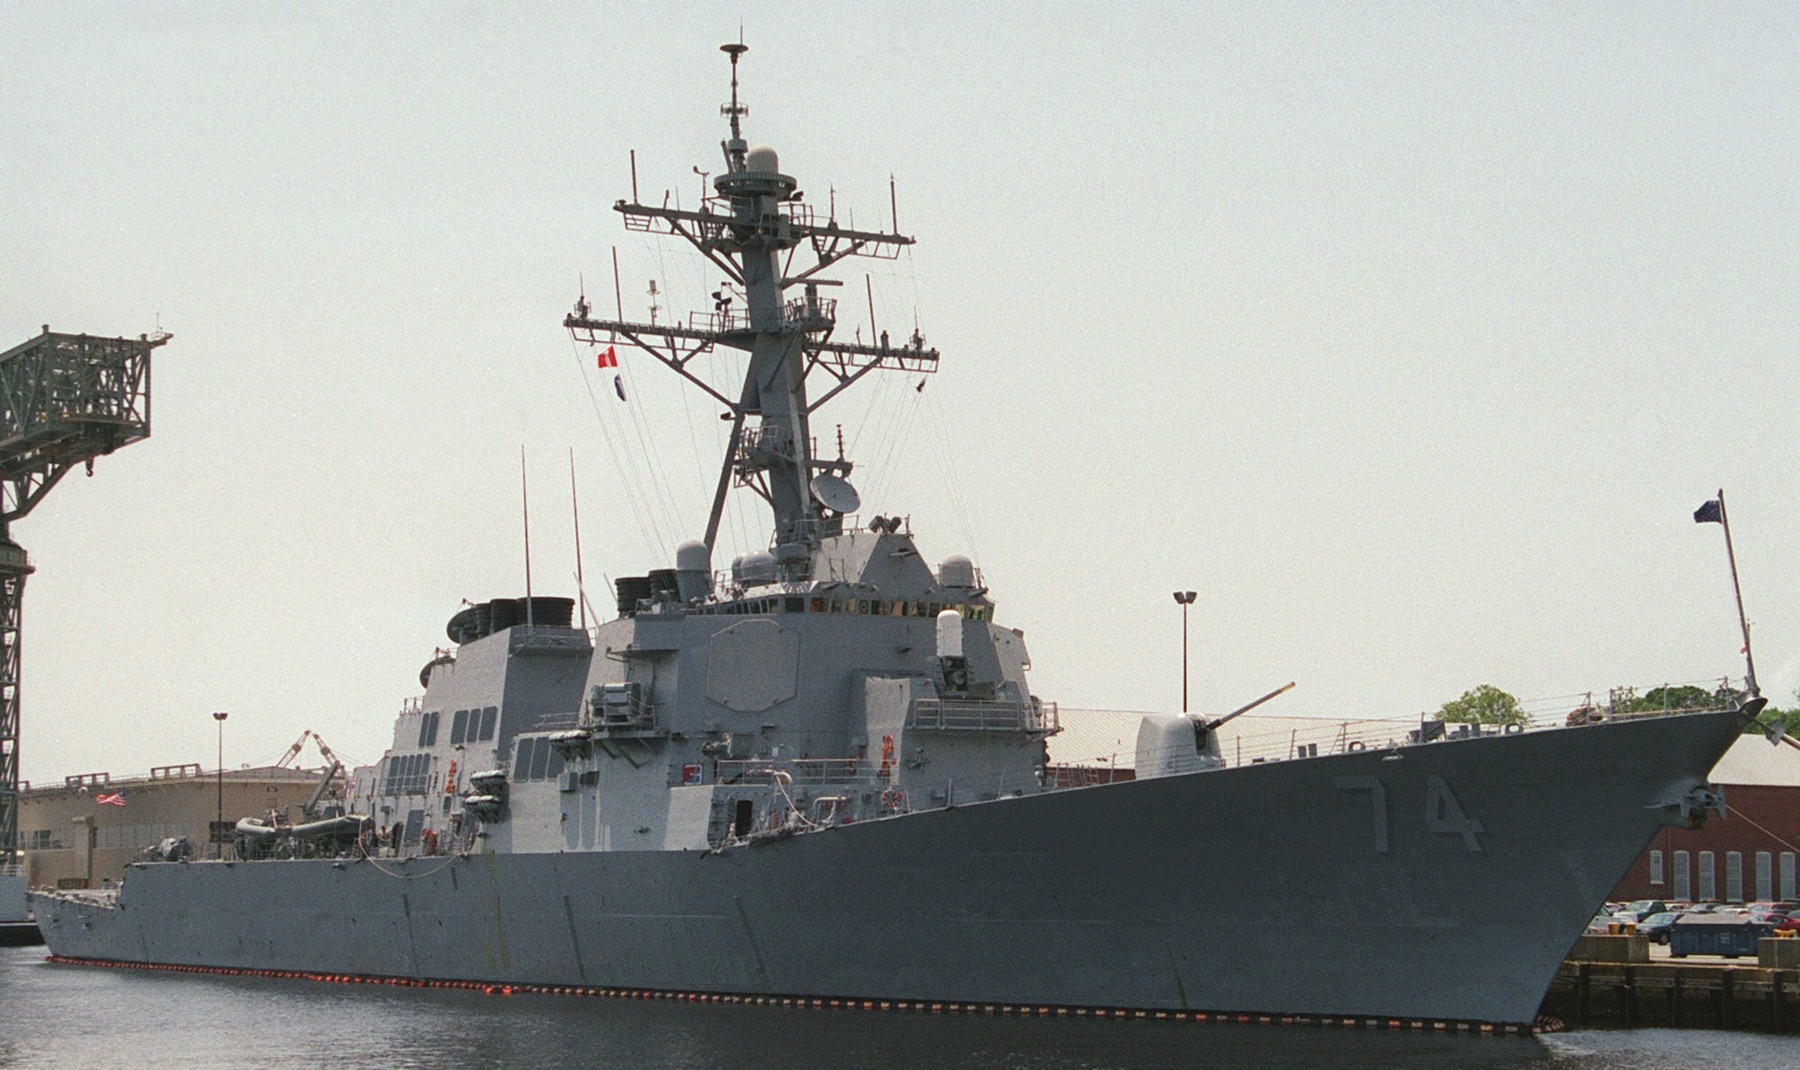 ddg-74 uss mcfaul guided missile destroyer arleigh burke class aegis us navy 57